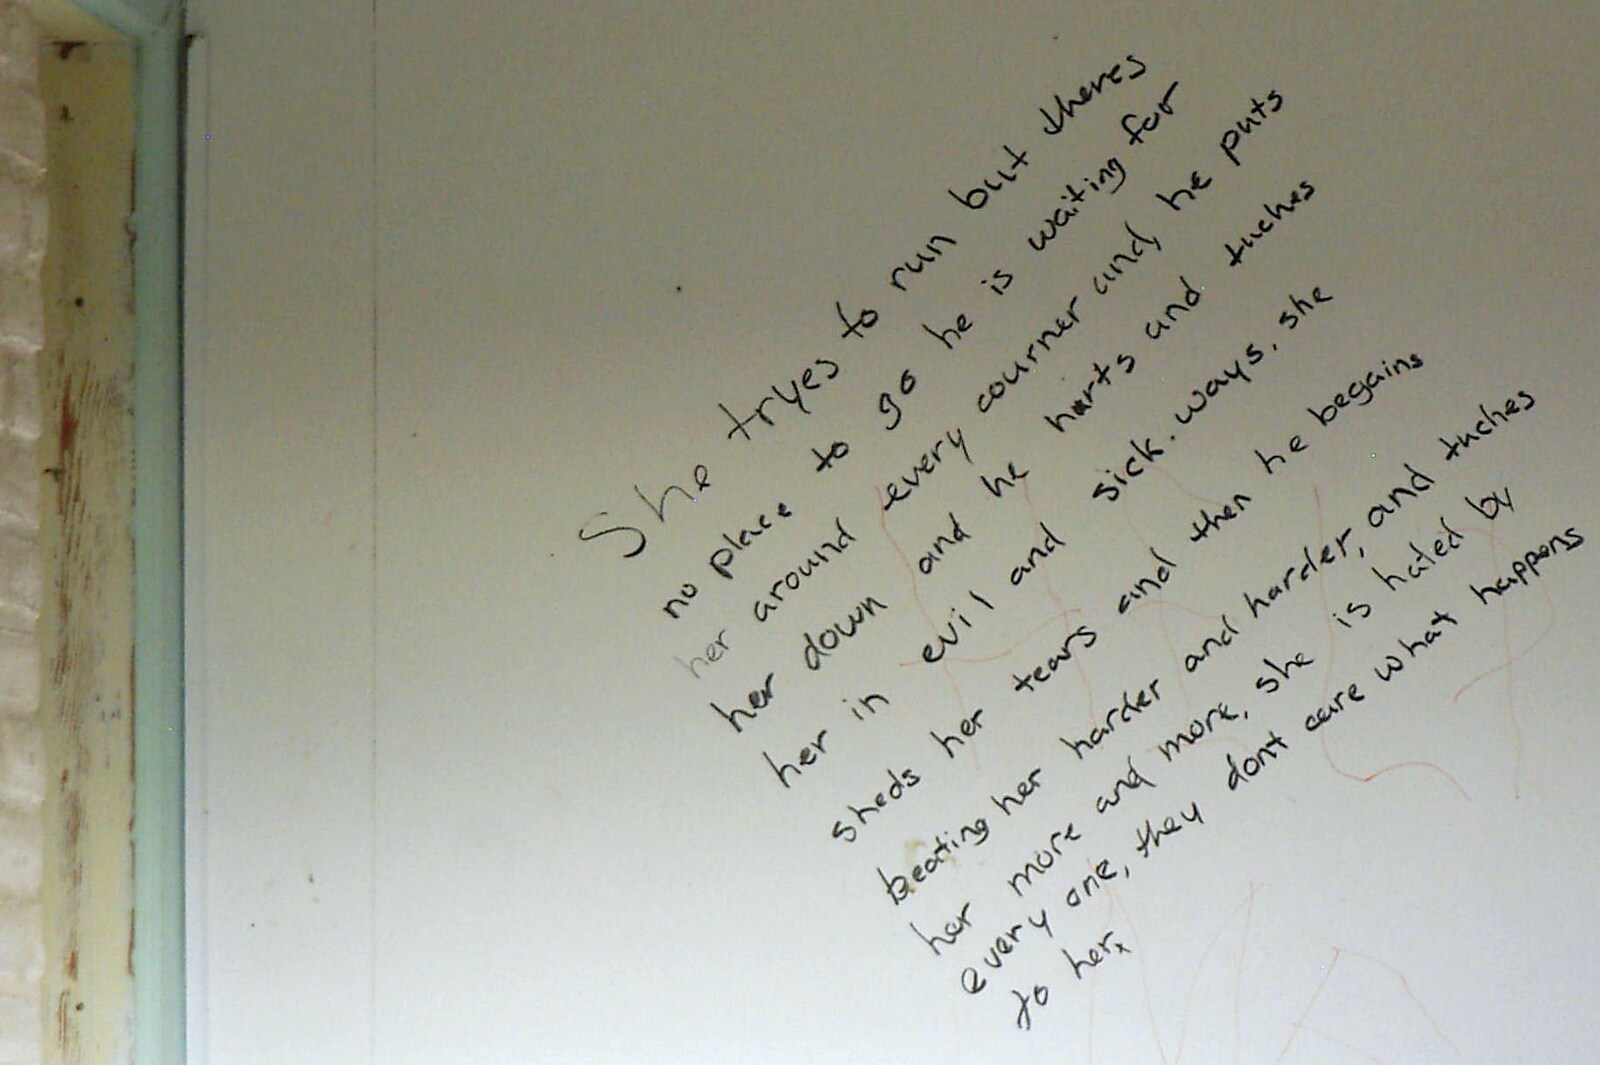 A dark missive is scrawled on the wall from Mojave Desert: San Diego to Joshua Tree and Twentynine Palms, California, US - 5th March 2006